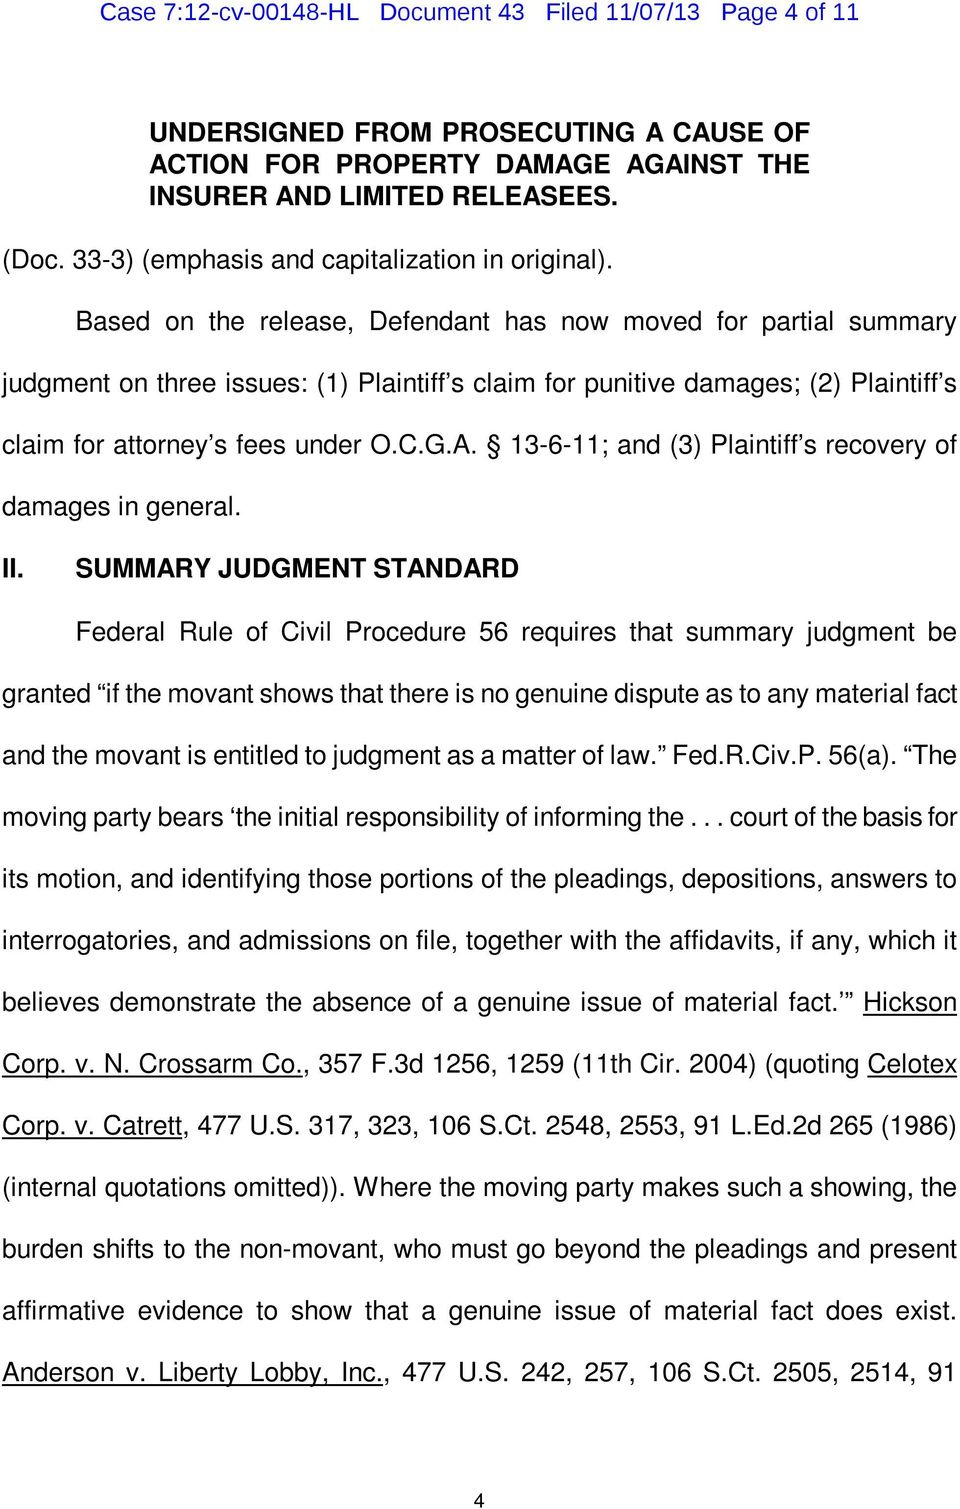 Based on the release, Defendant has now moved for partial summary judgment on three issues: (1) Plaintiff s claim for punitive damages; (2) Plaintiff s claim for attorney s fees under O.C.G.A.